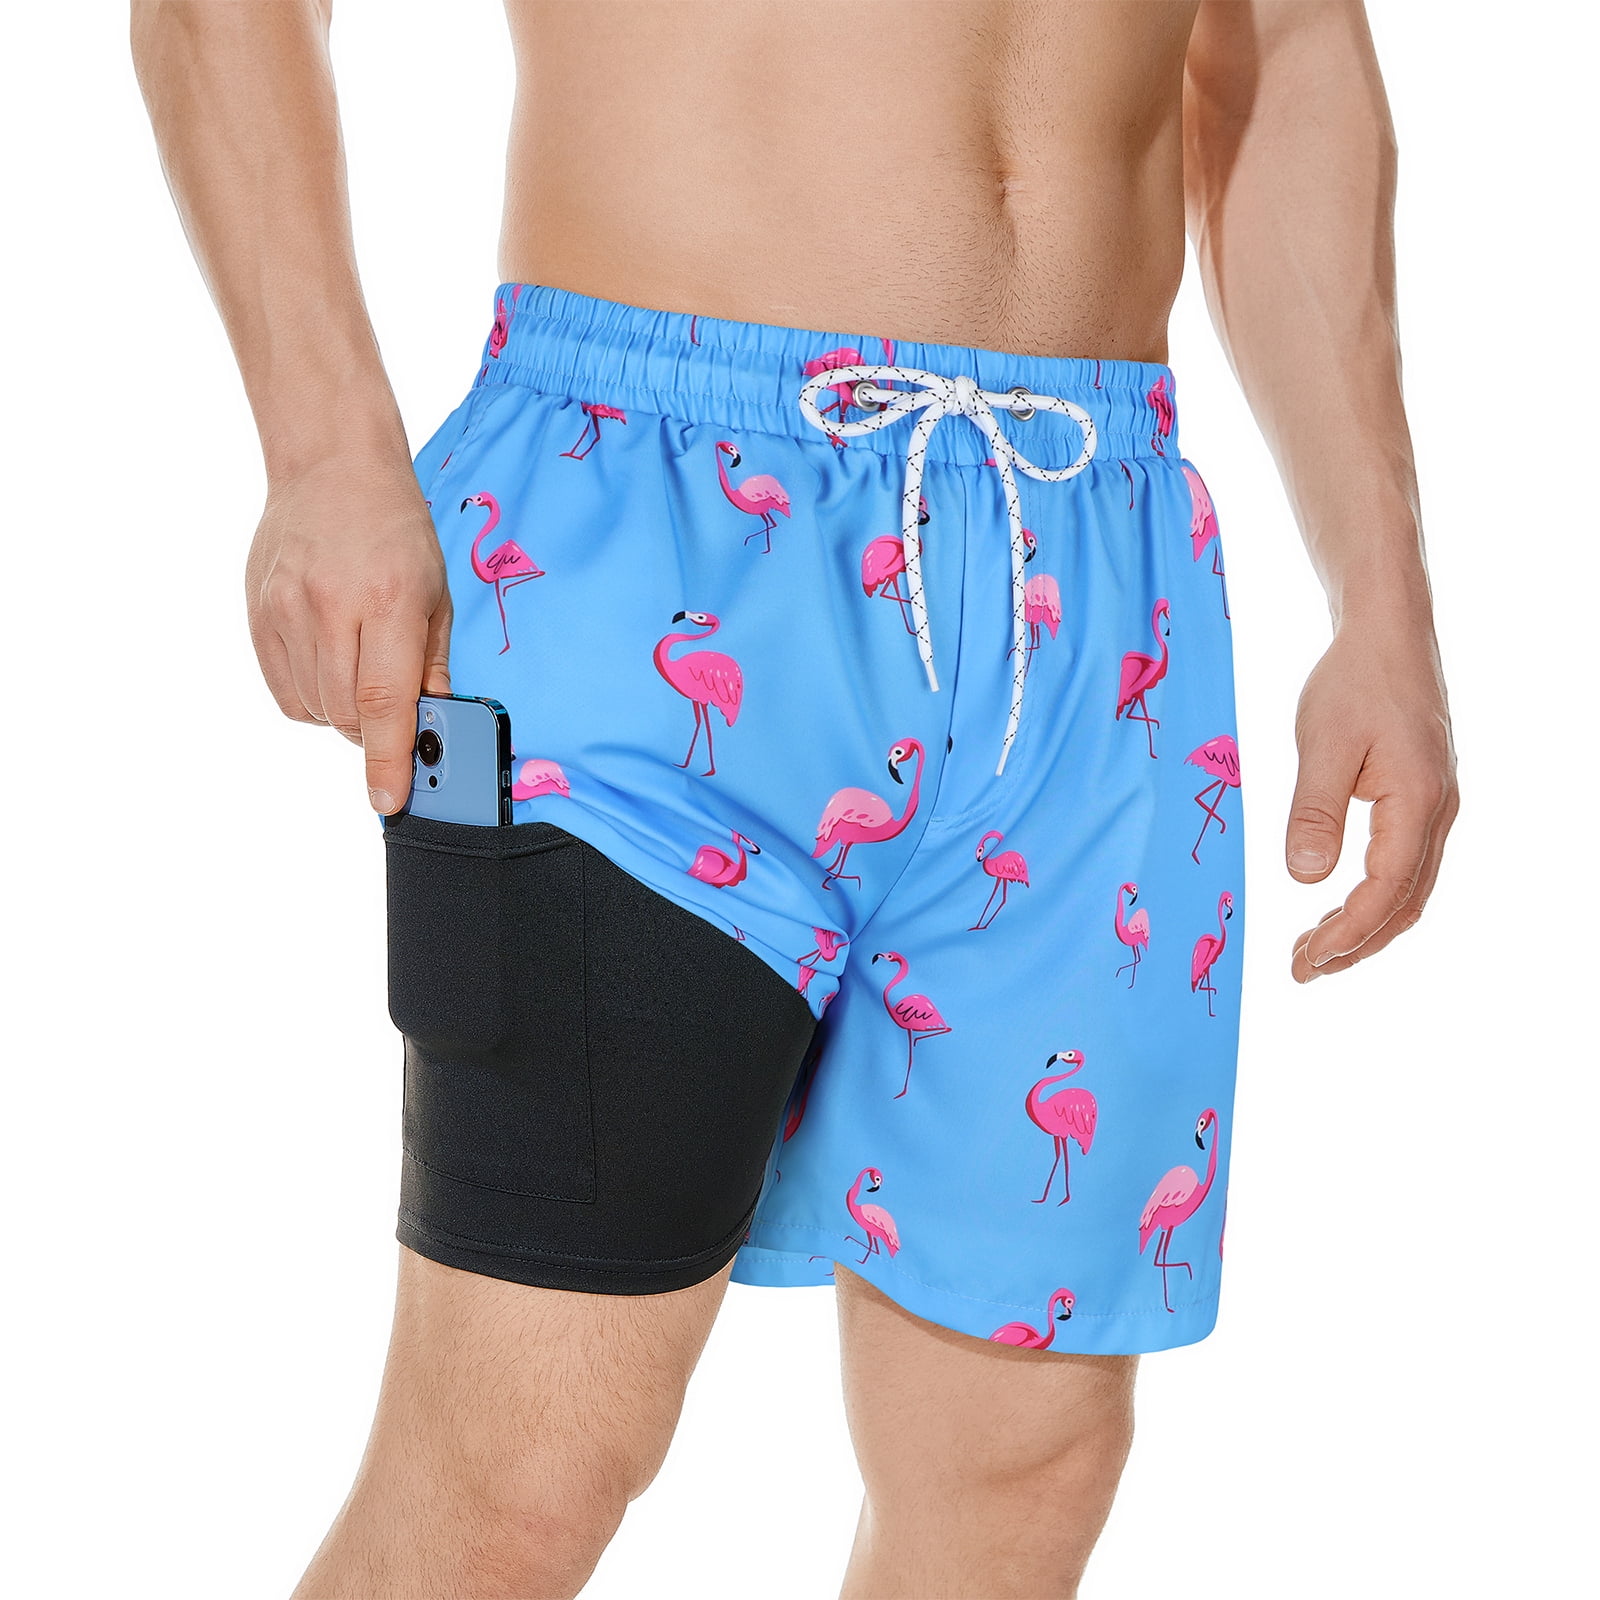 The 15 Best Compression-Lined Swim Trunks for Men in 2023